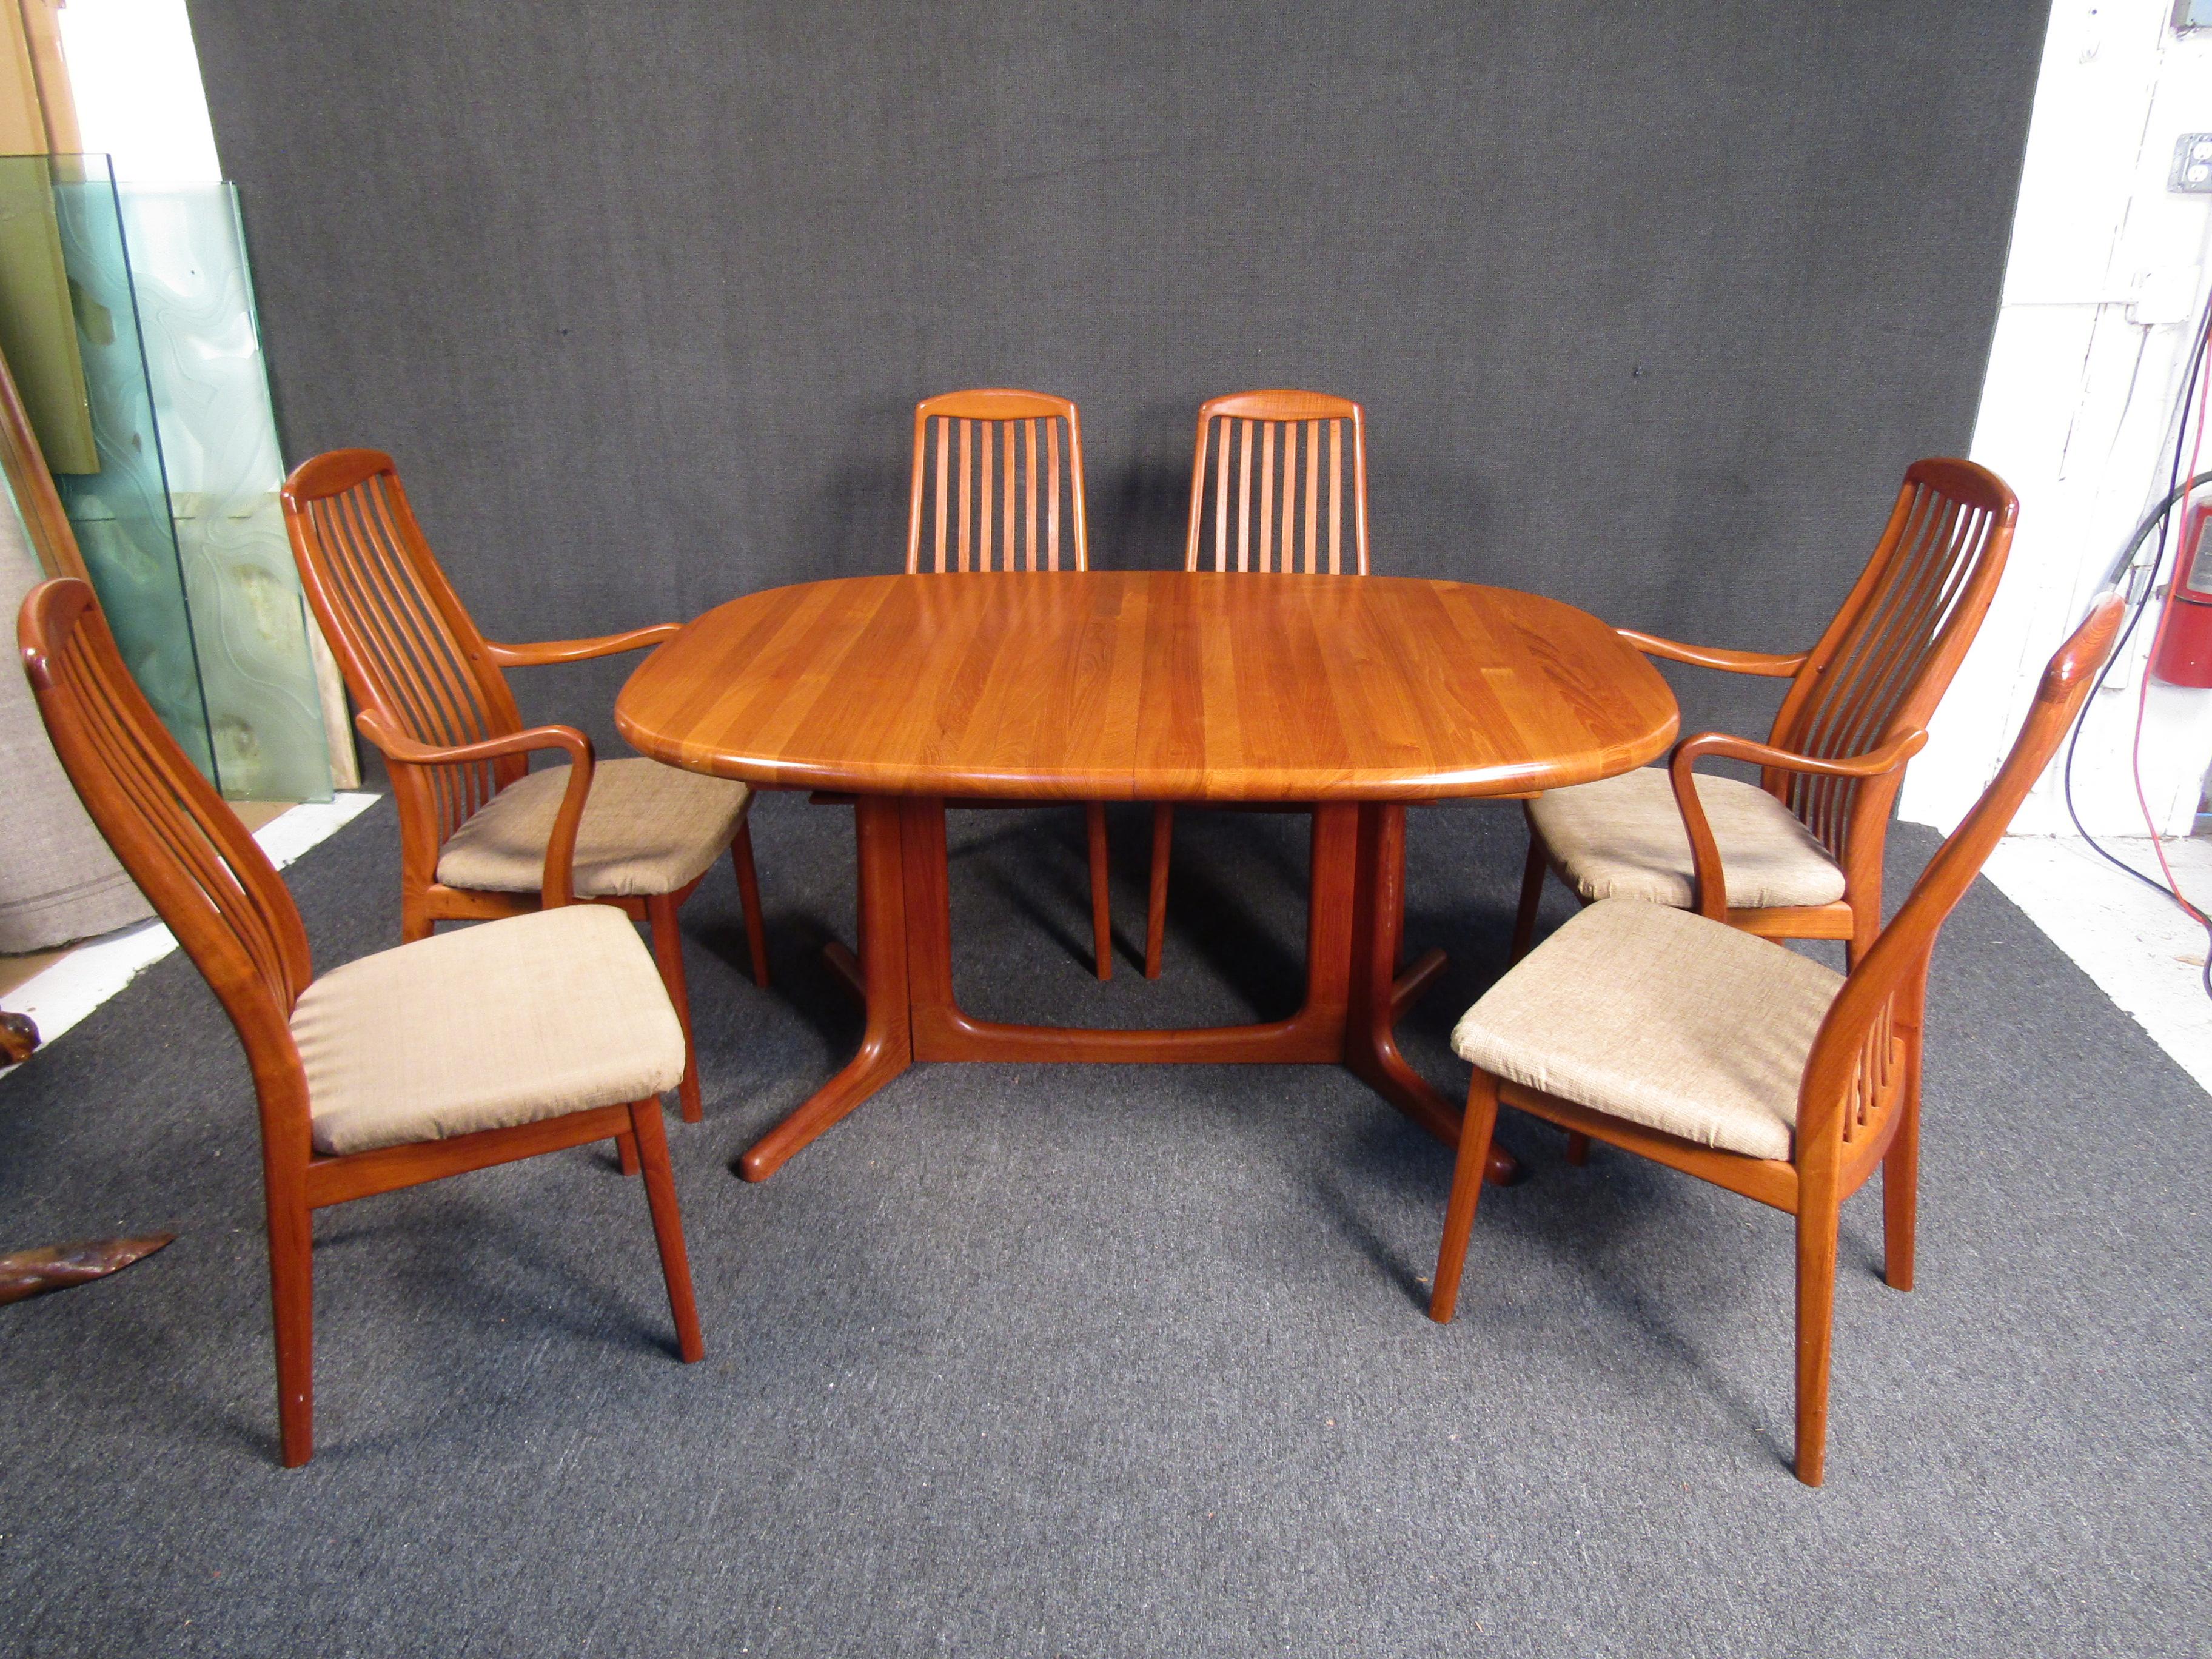 Full of Mid-Century Modern elegance, this vintage dining set by Glostrup combines understated design with craftsmanship and rich teak wood. The table can extend with two leaves, making this set a versatile addition to any home. Please confirm item